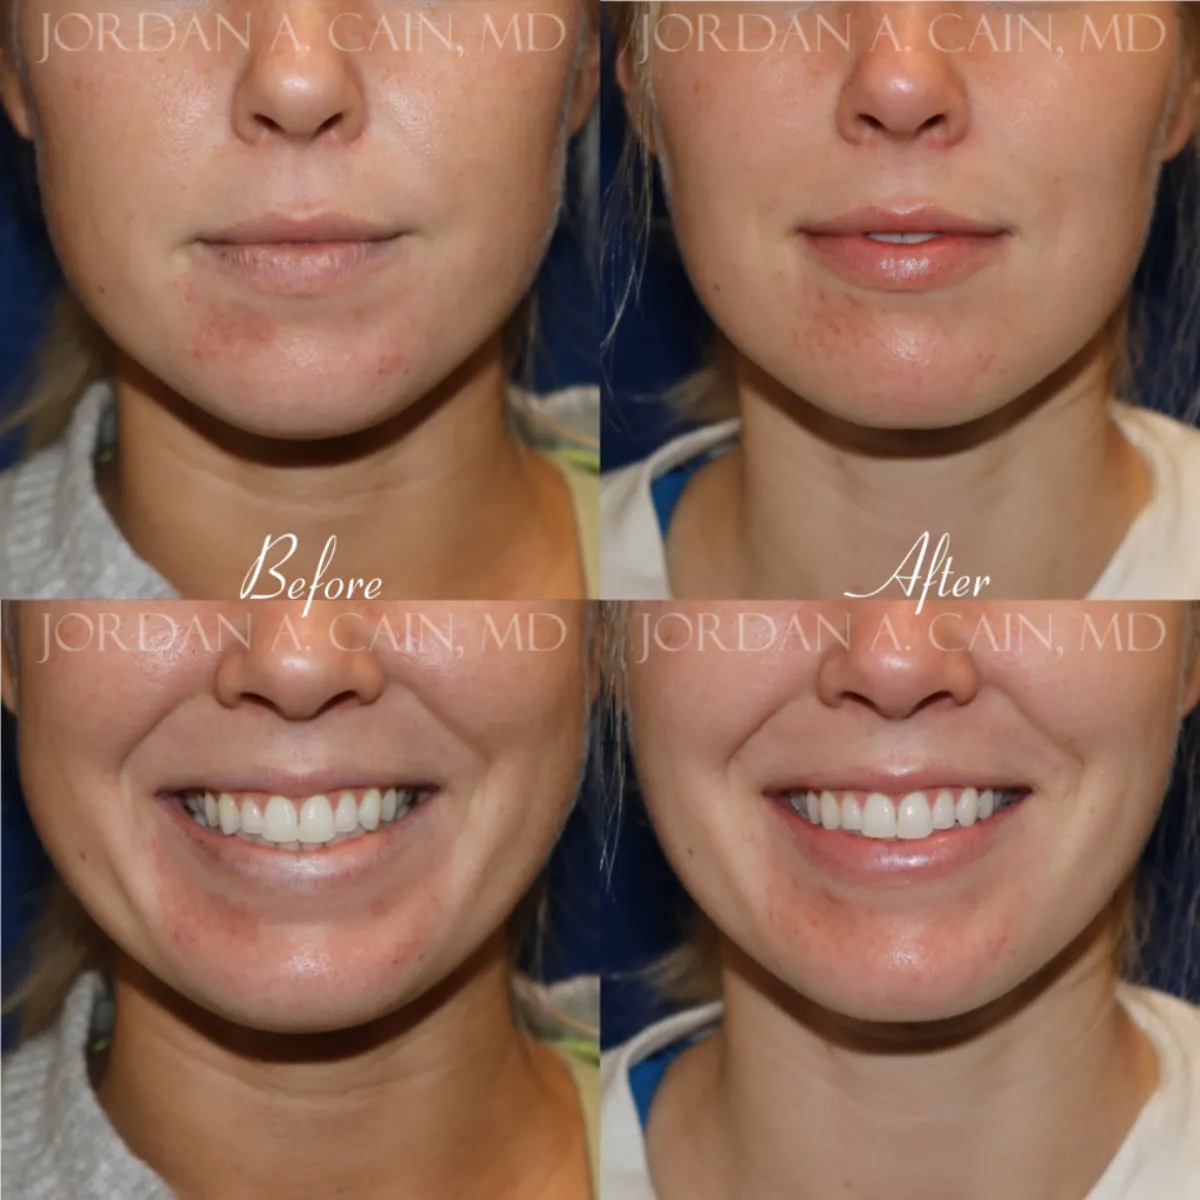 Buccal Fat Reduction Before and After Performed by Jordan A. Cain, MD